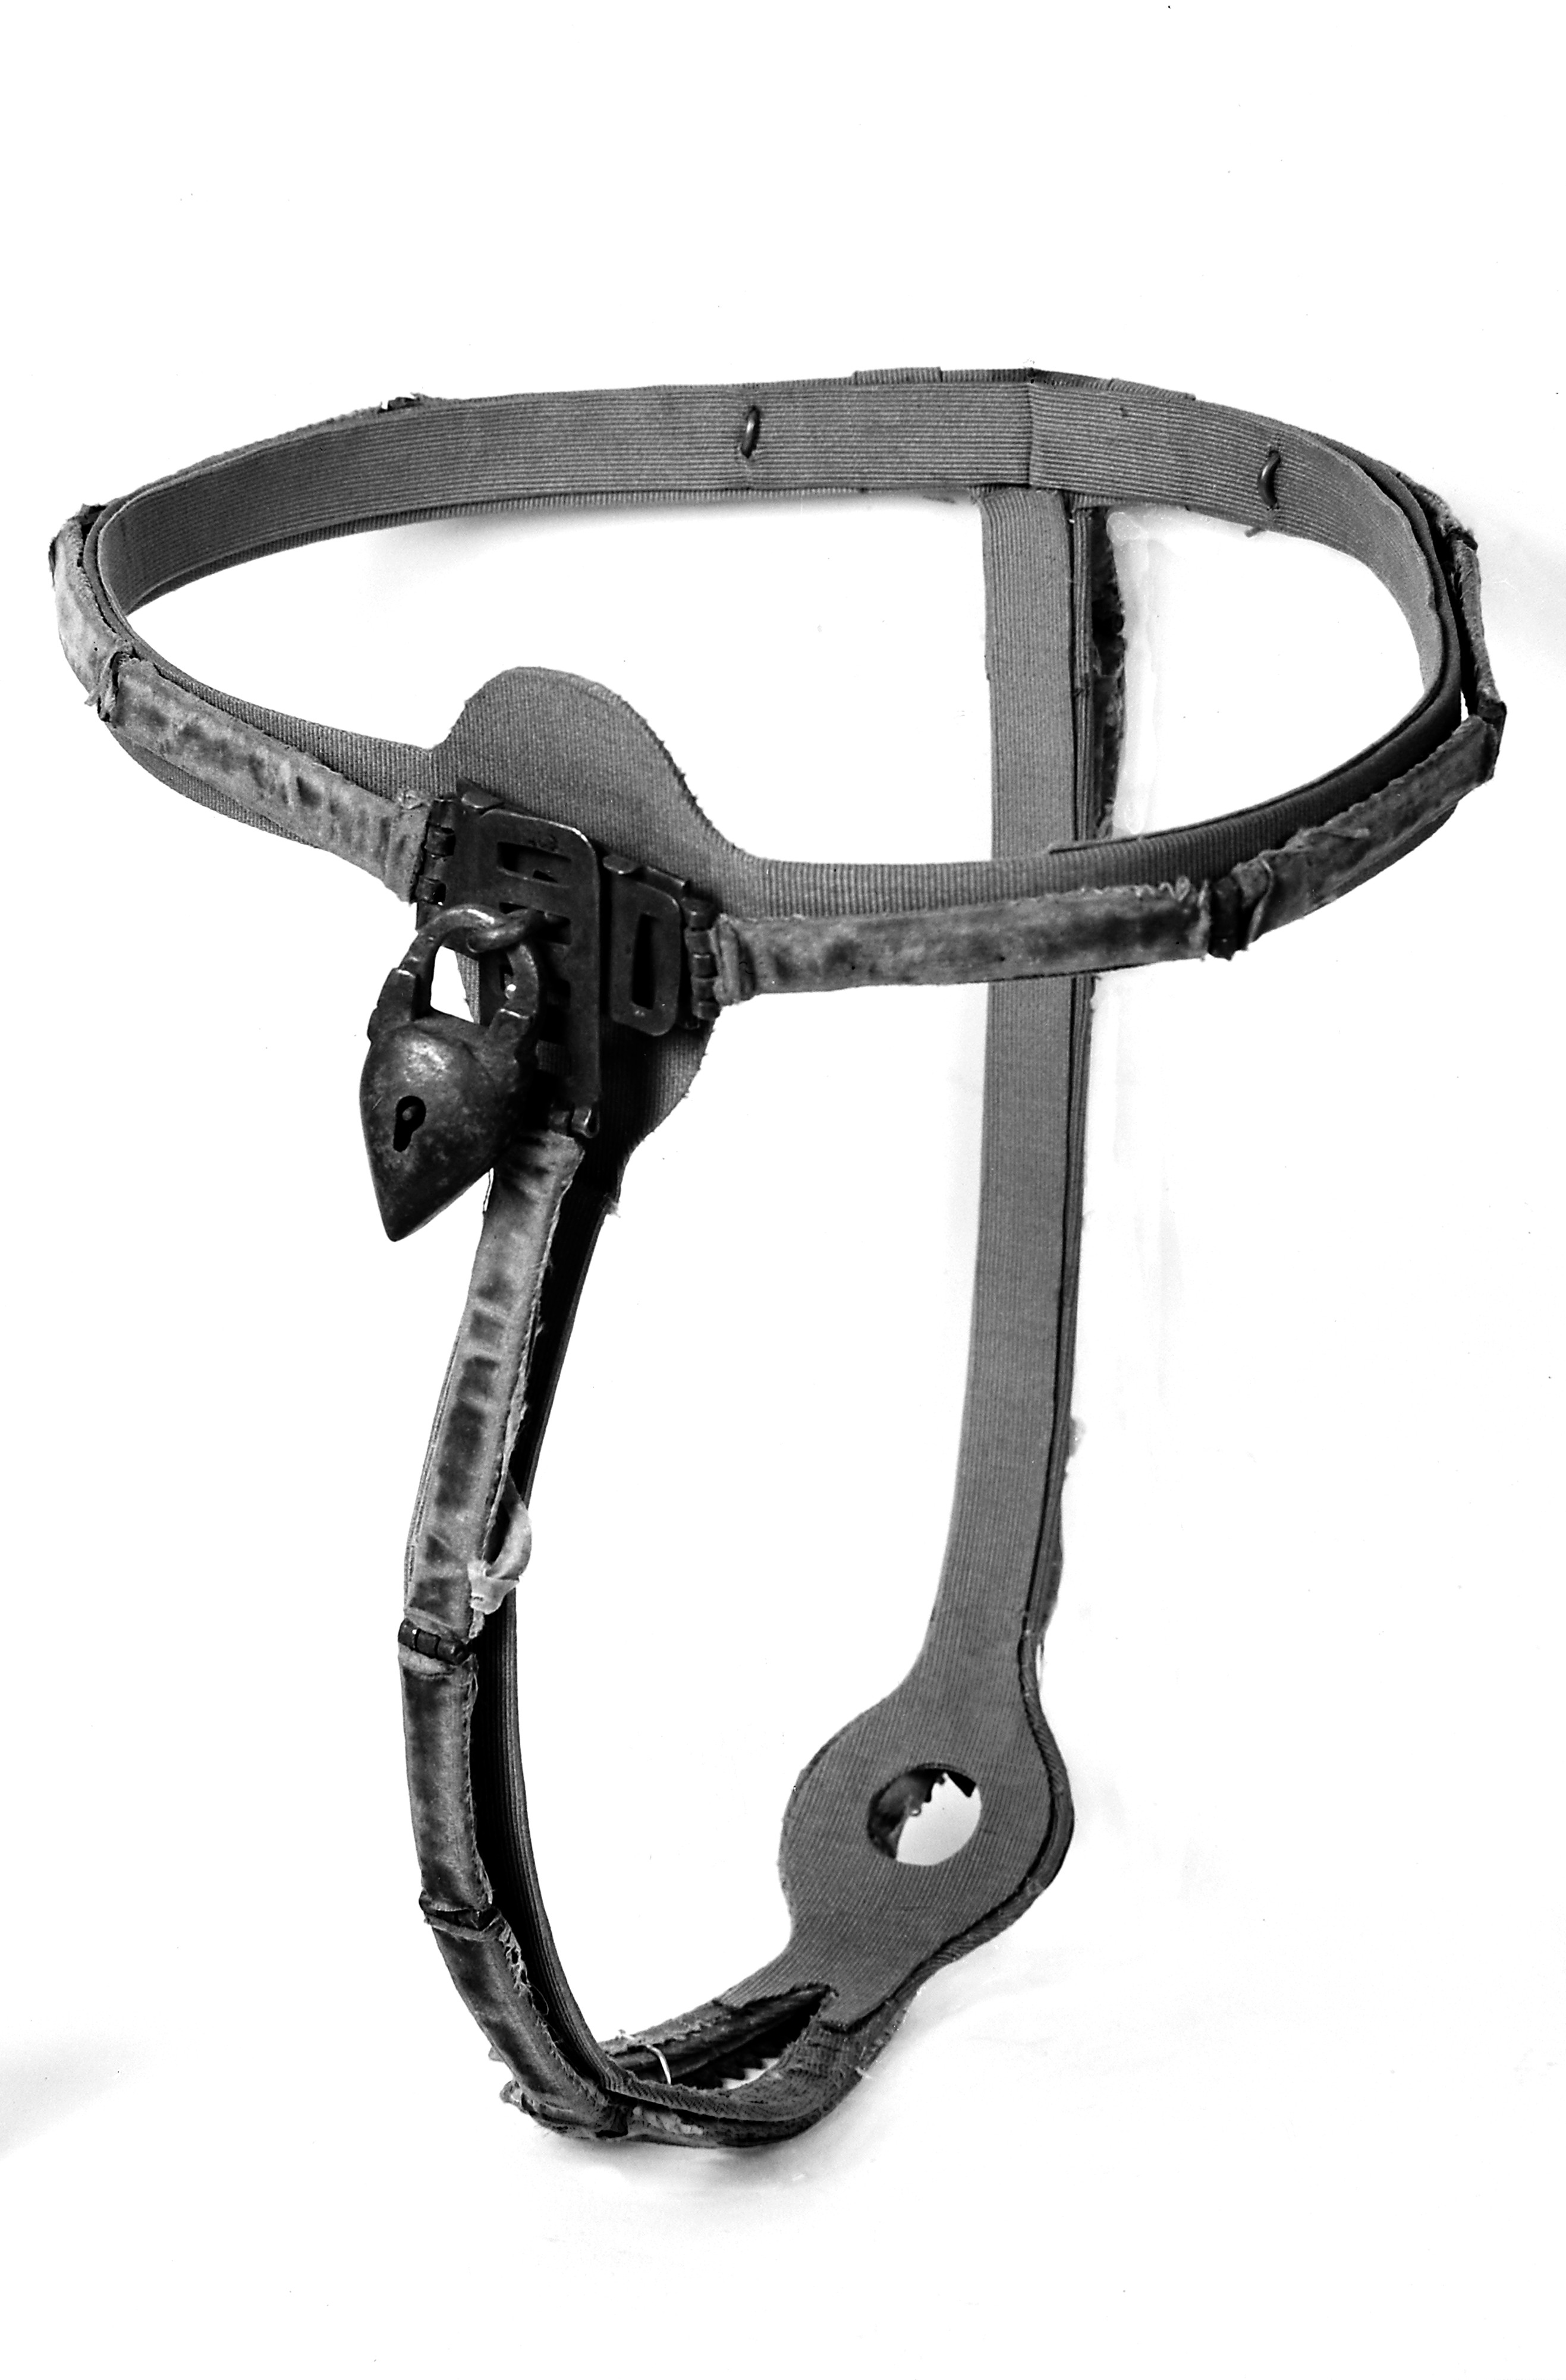 ashish jadav recommends home made chastity belt pic